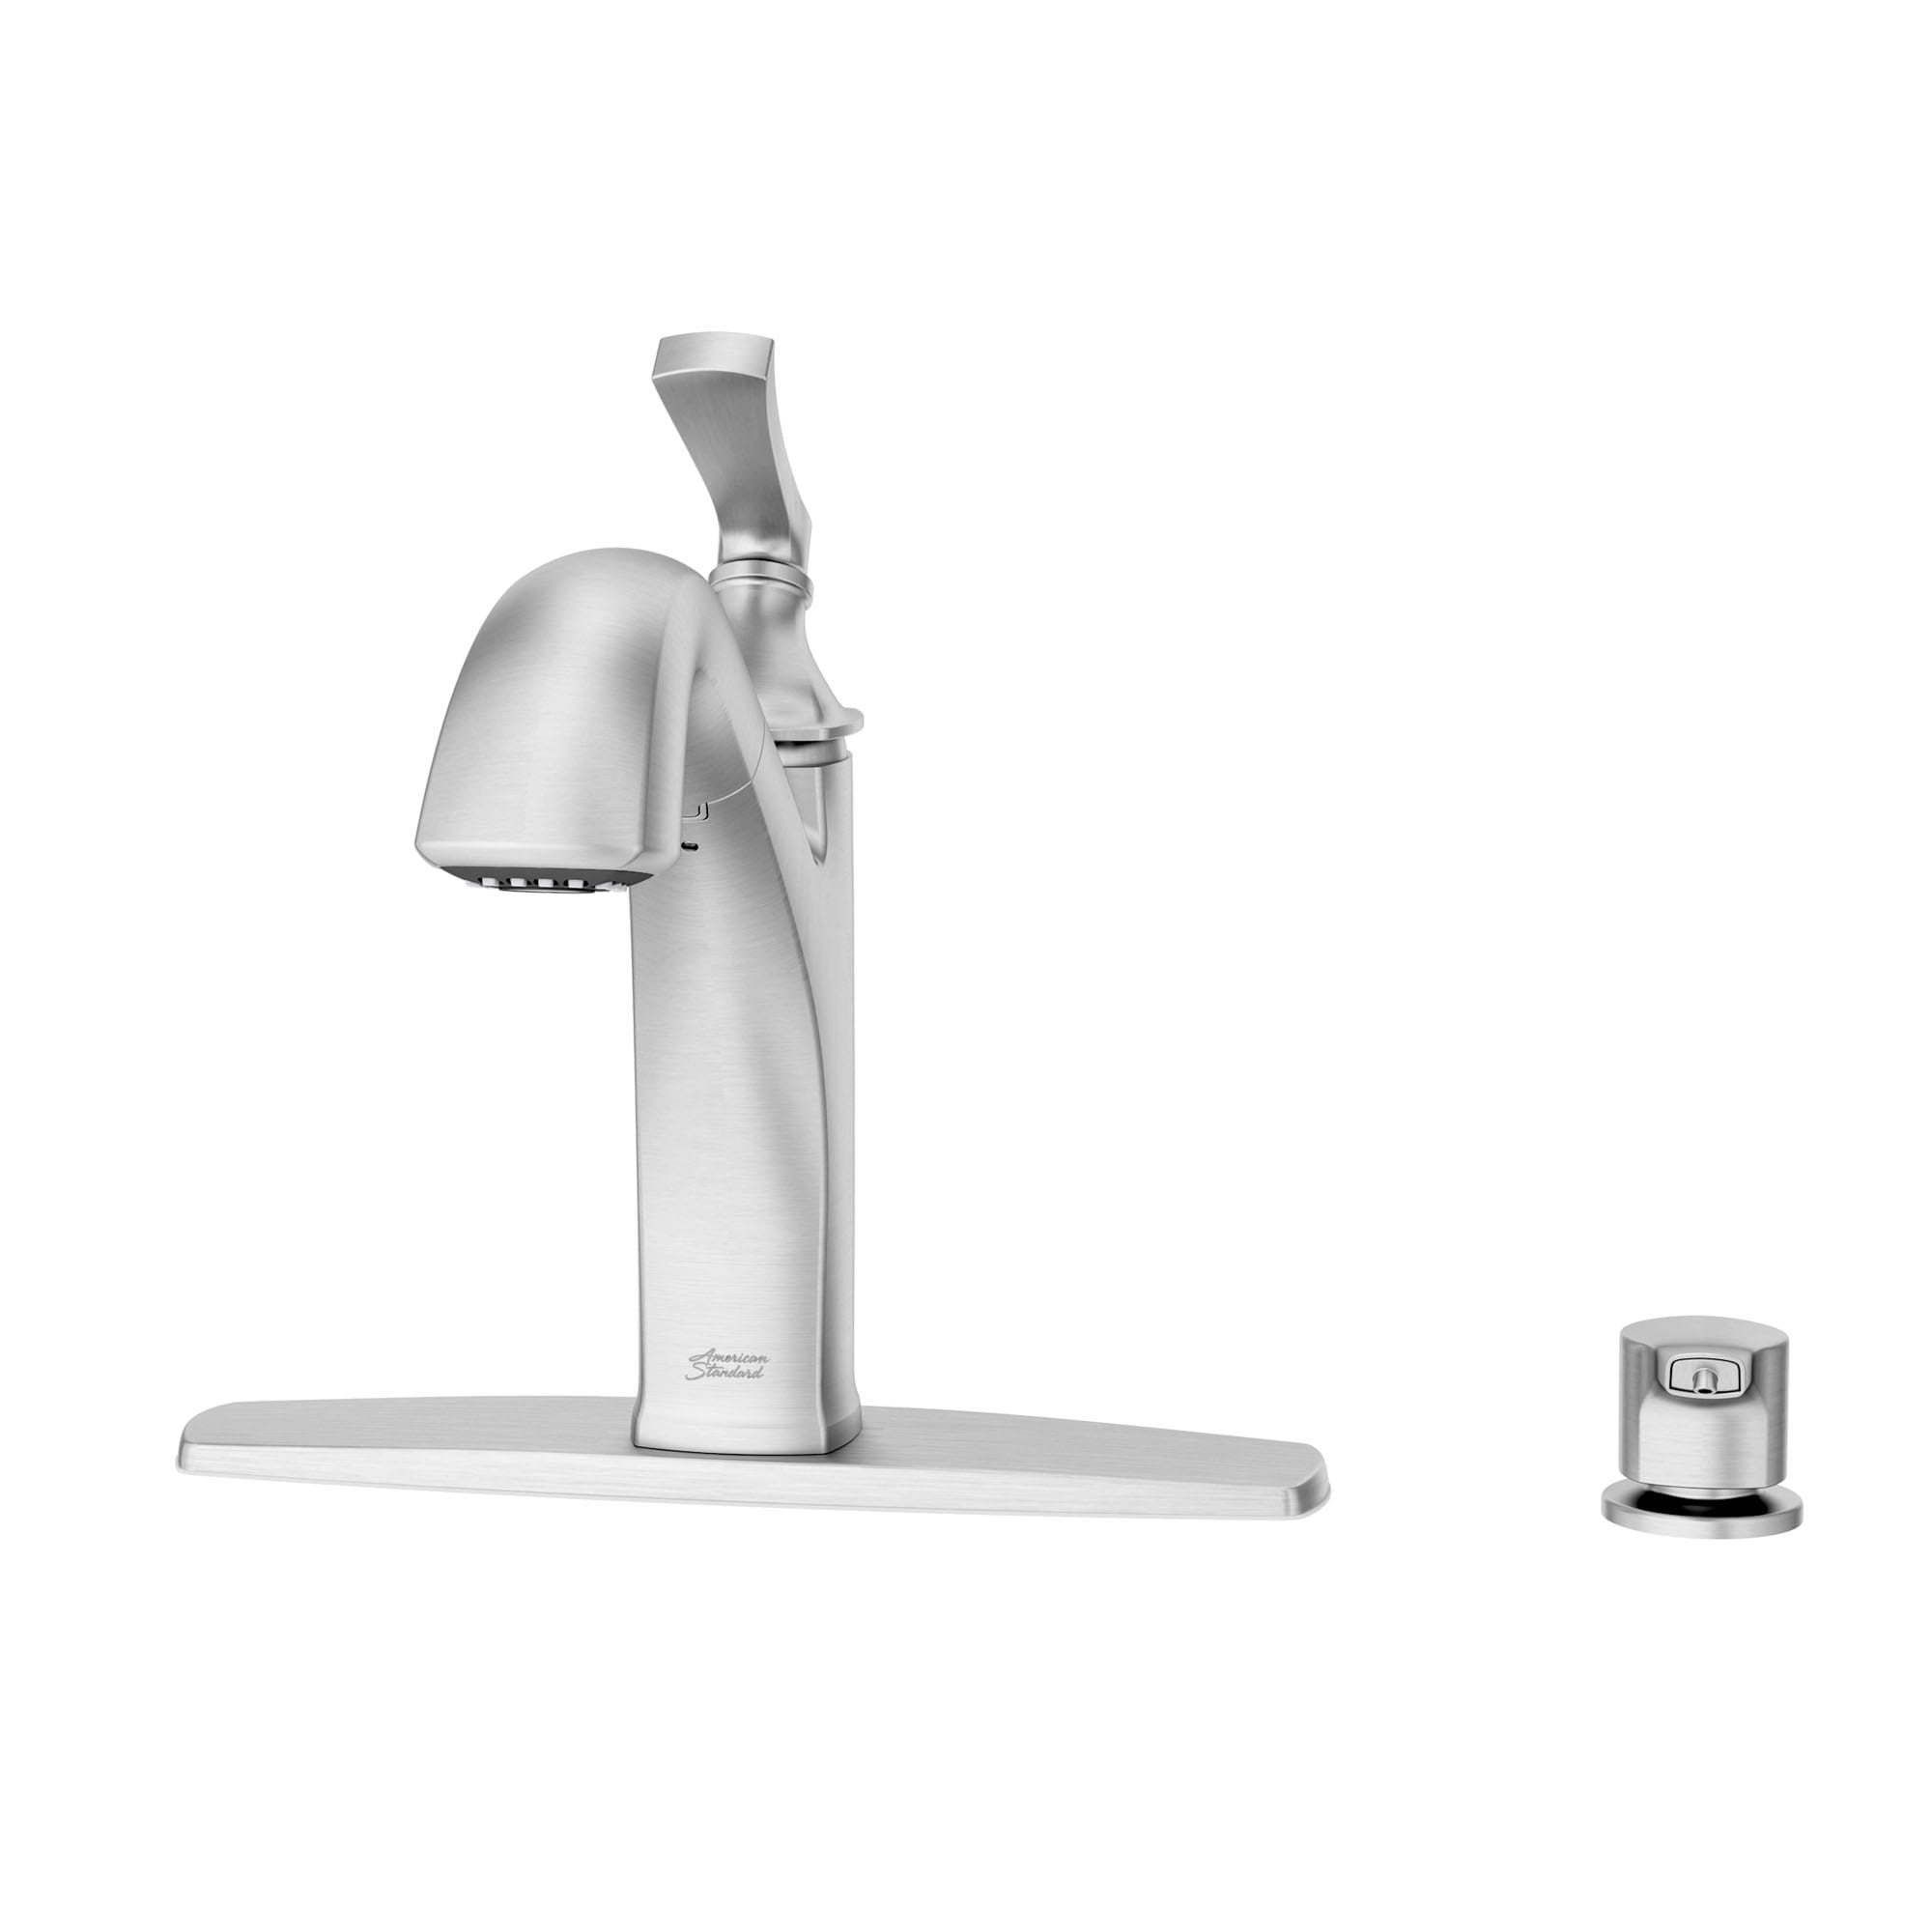 American Standard Kaleta Pullout Kitchen Faucet with Soap Dispenser STAINLESS STL